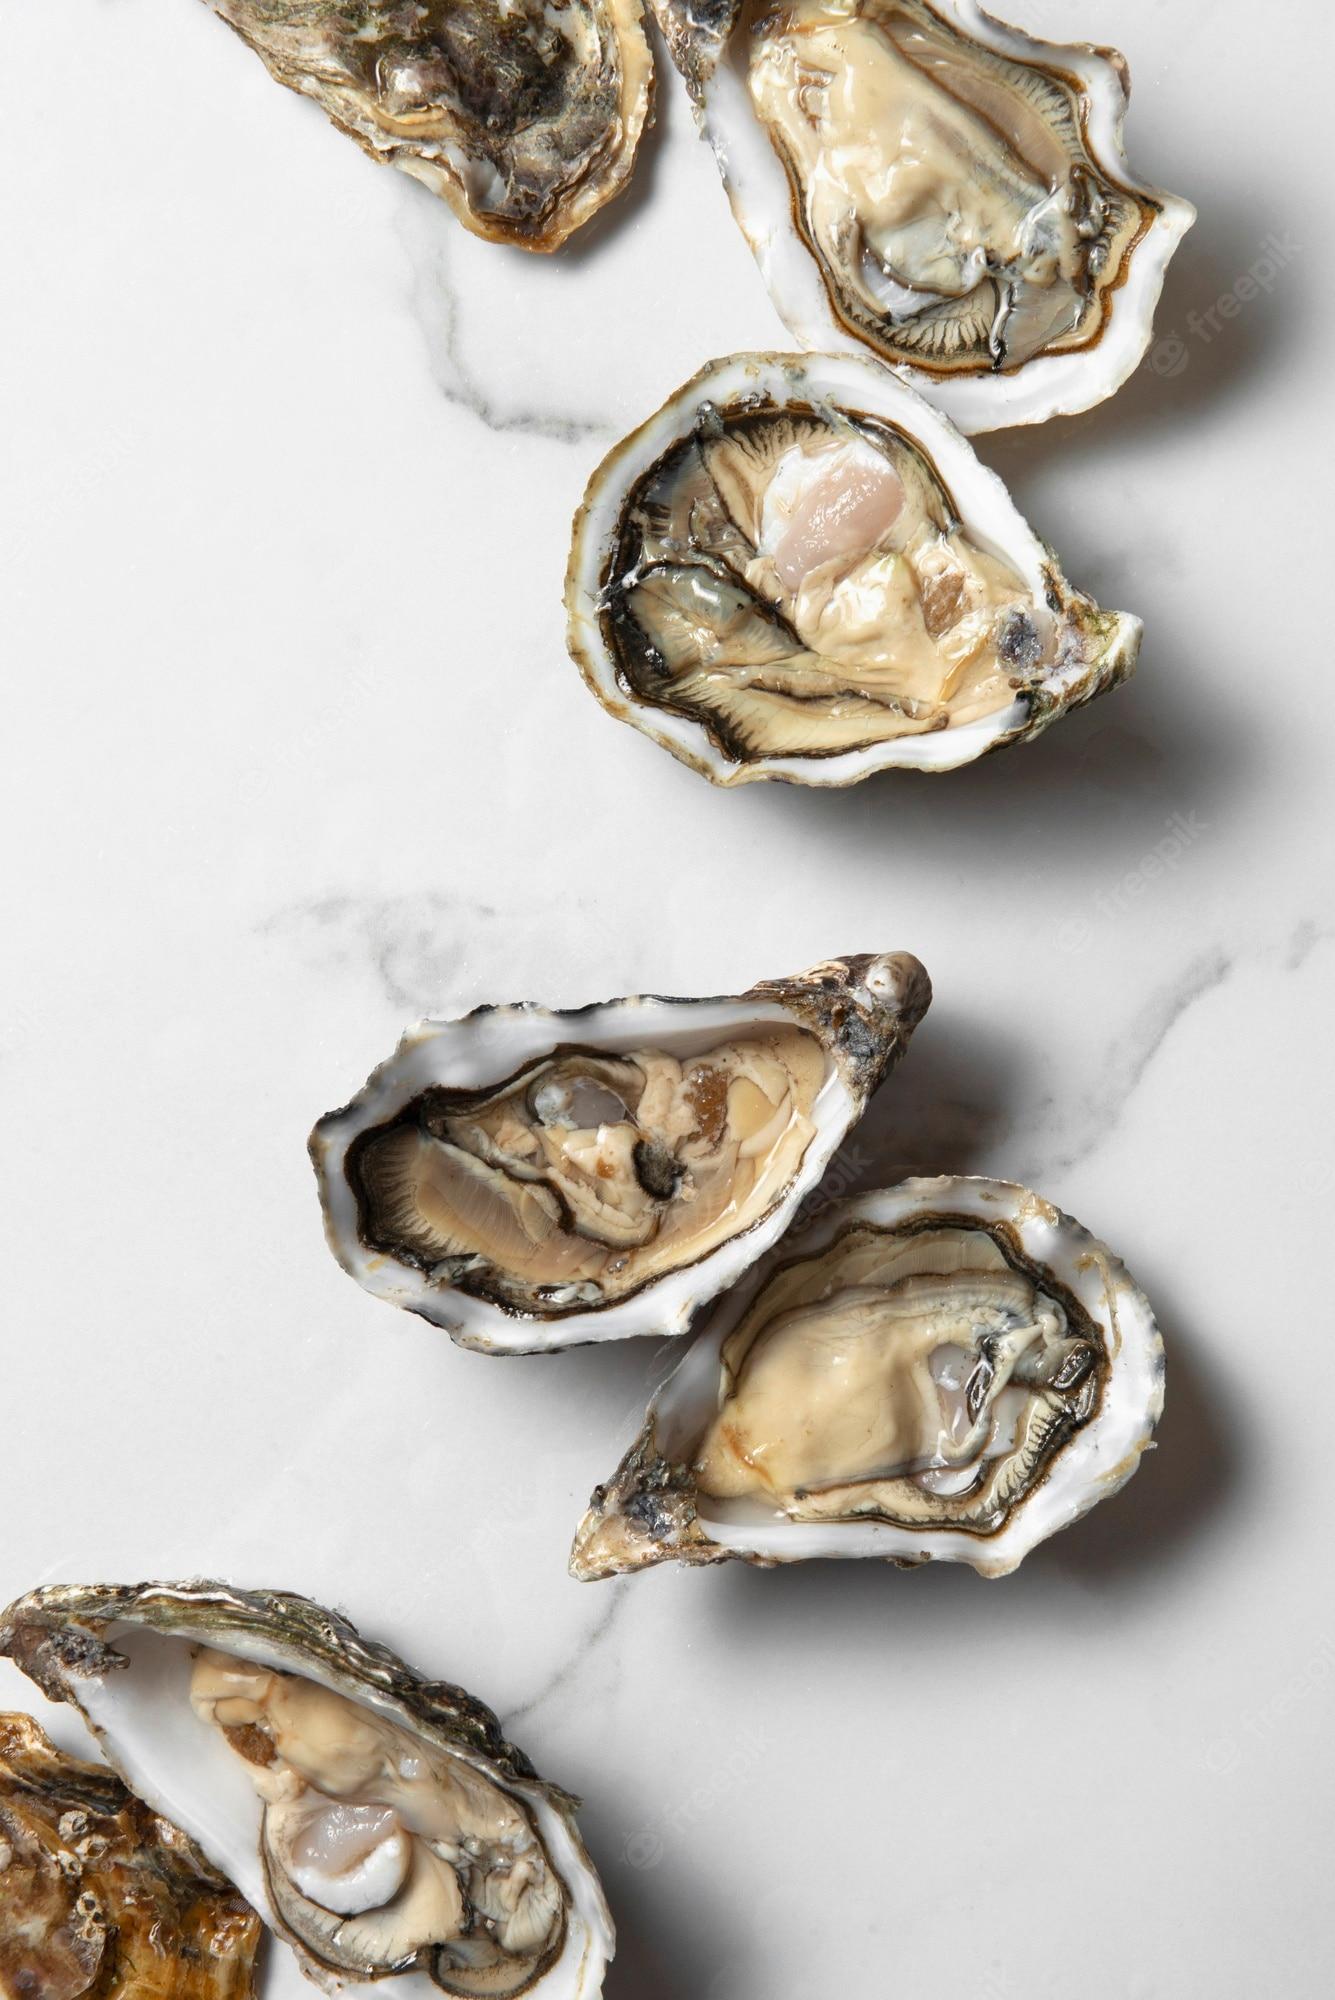 Oysters Pictures iPhone Wallpaper 1335x2000